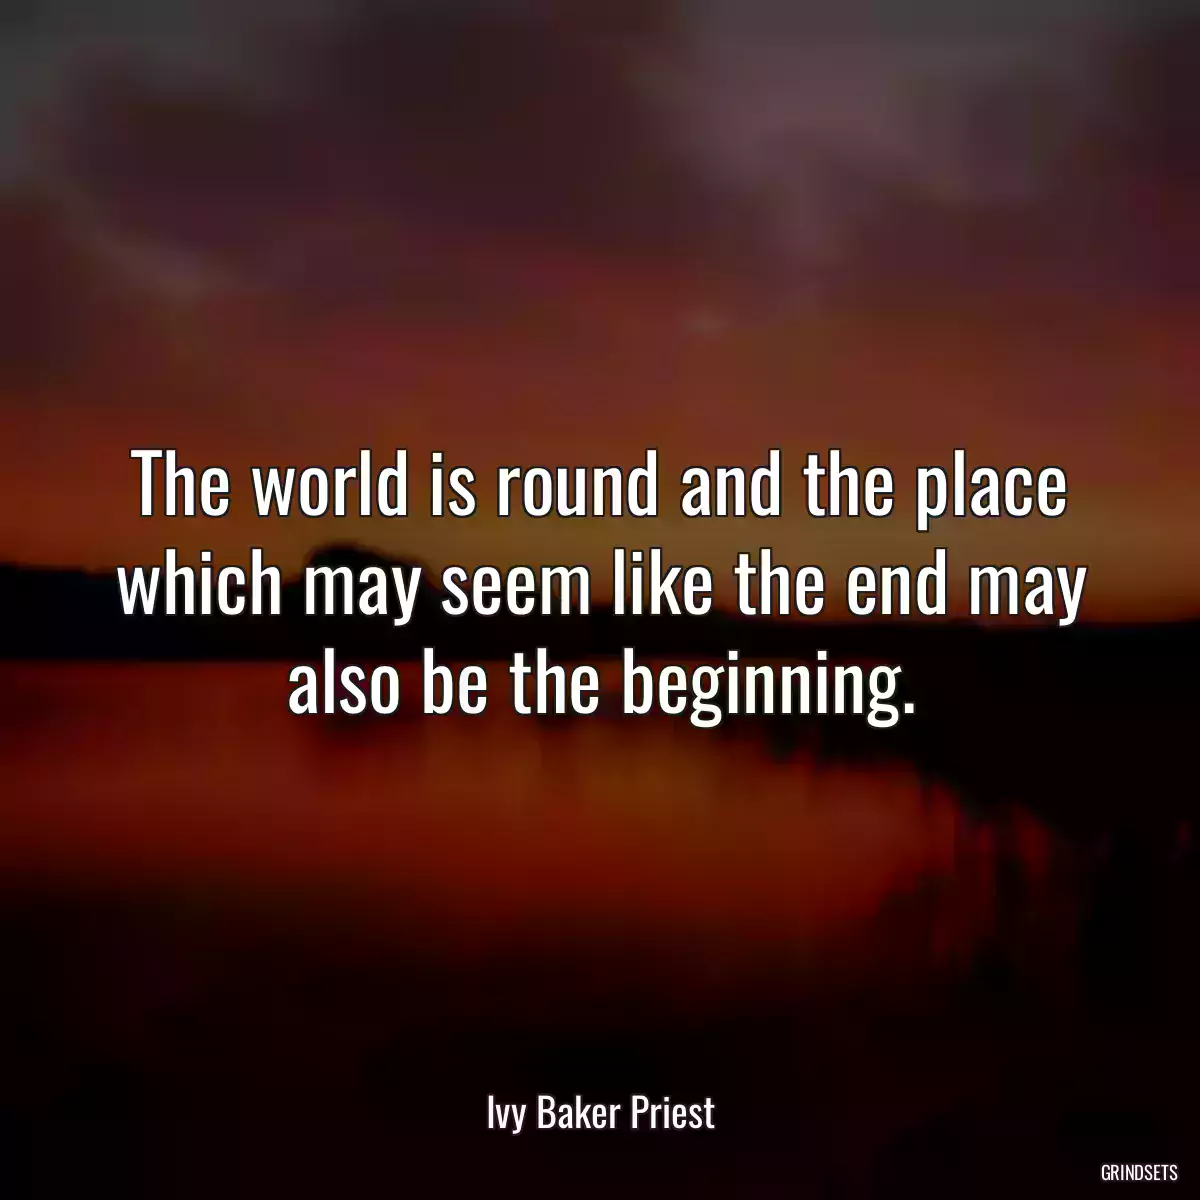 The world is round and the place which may seem like the end may also be the beginning.